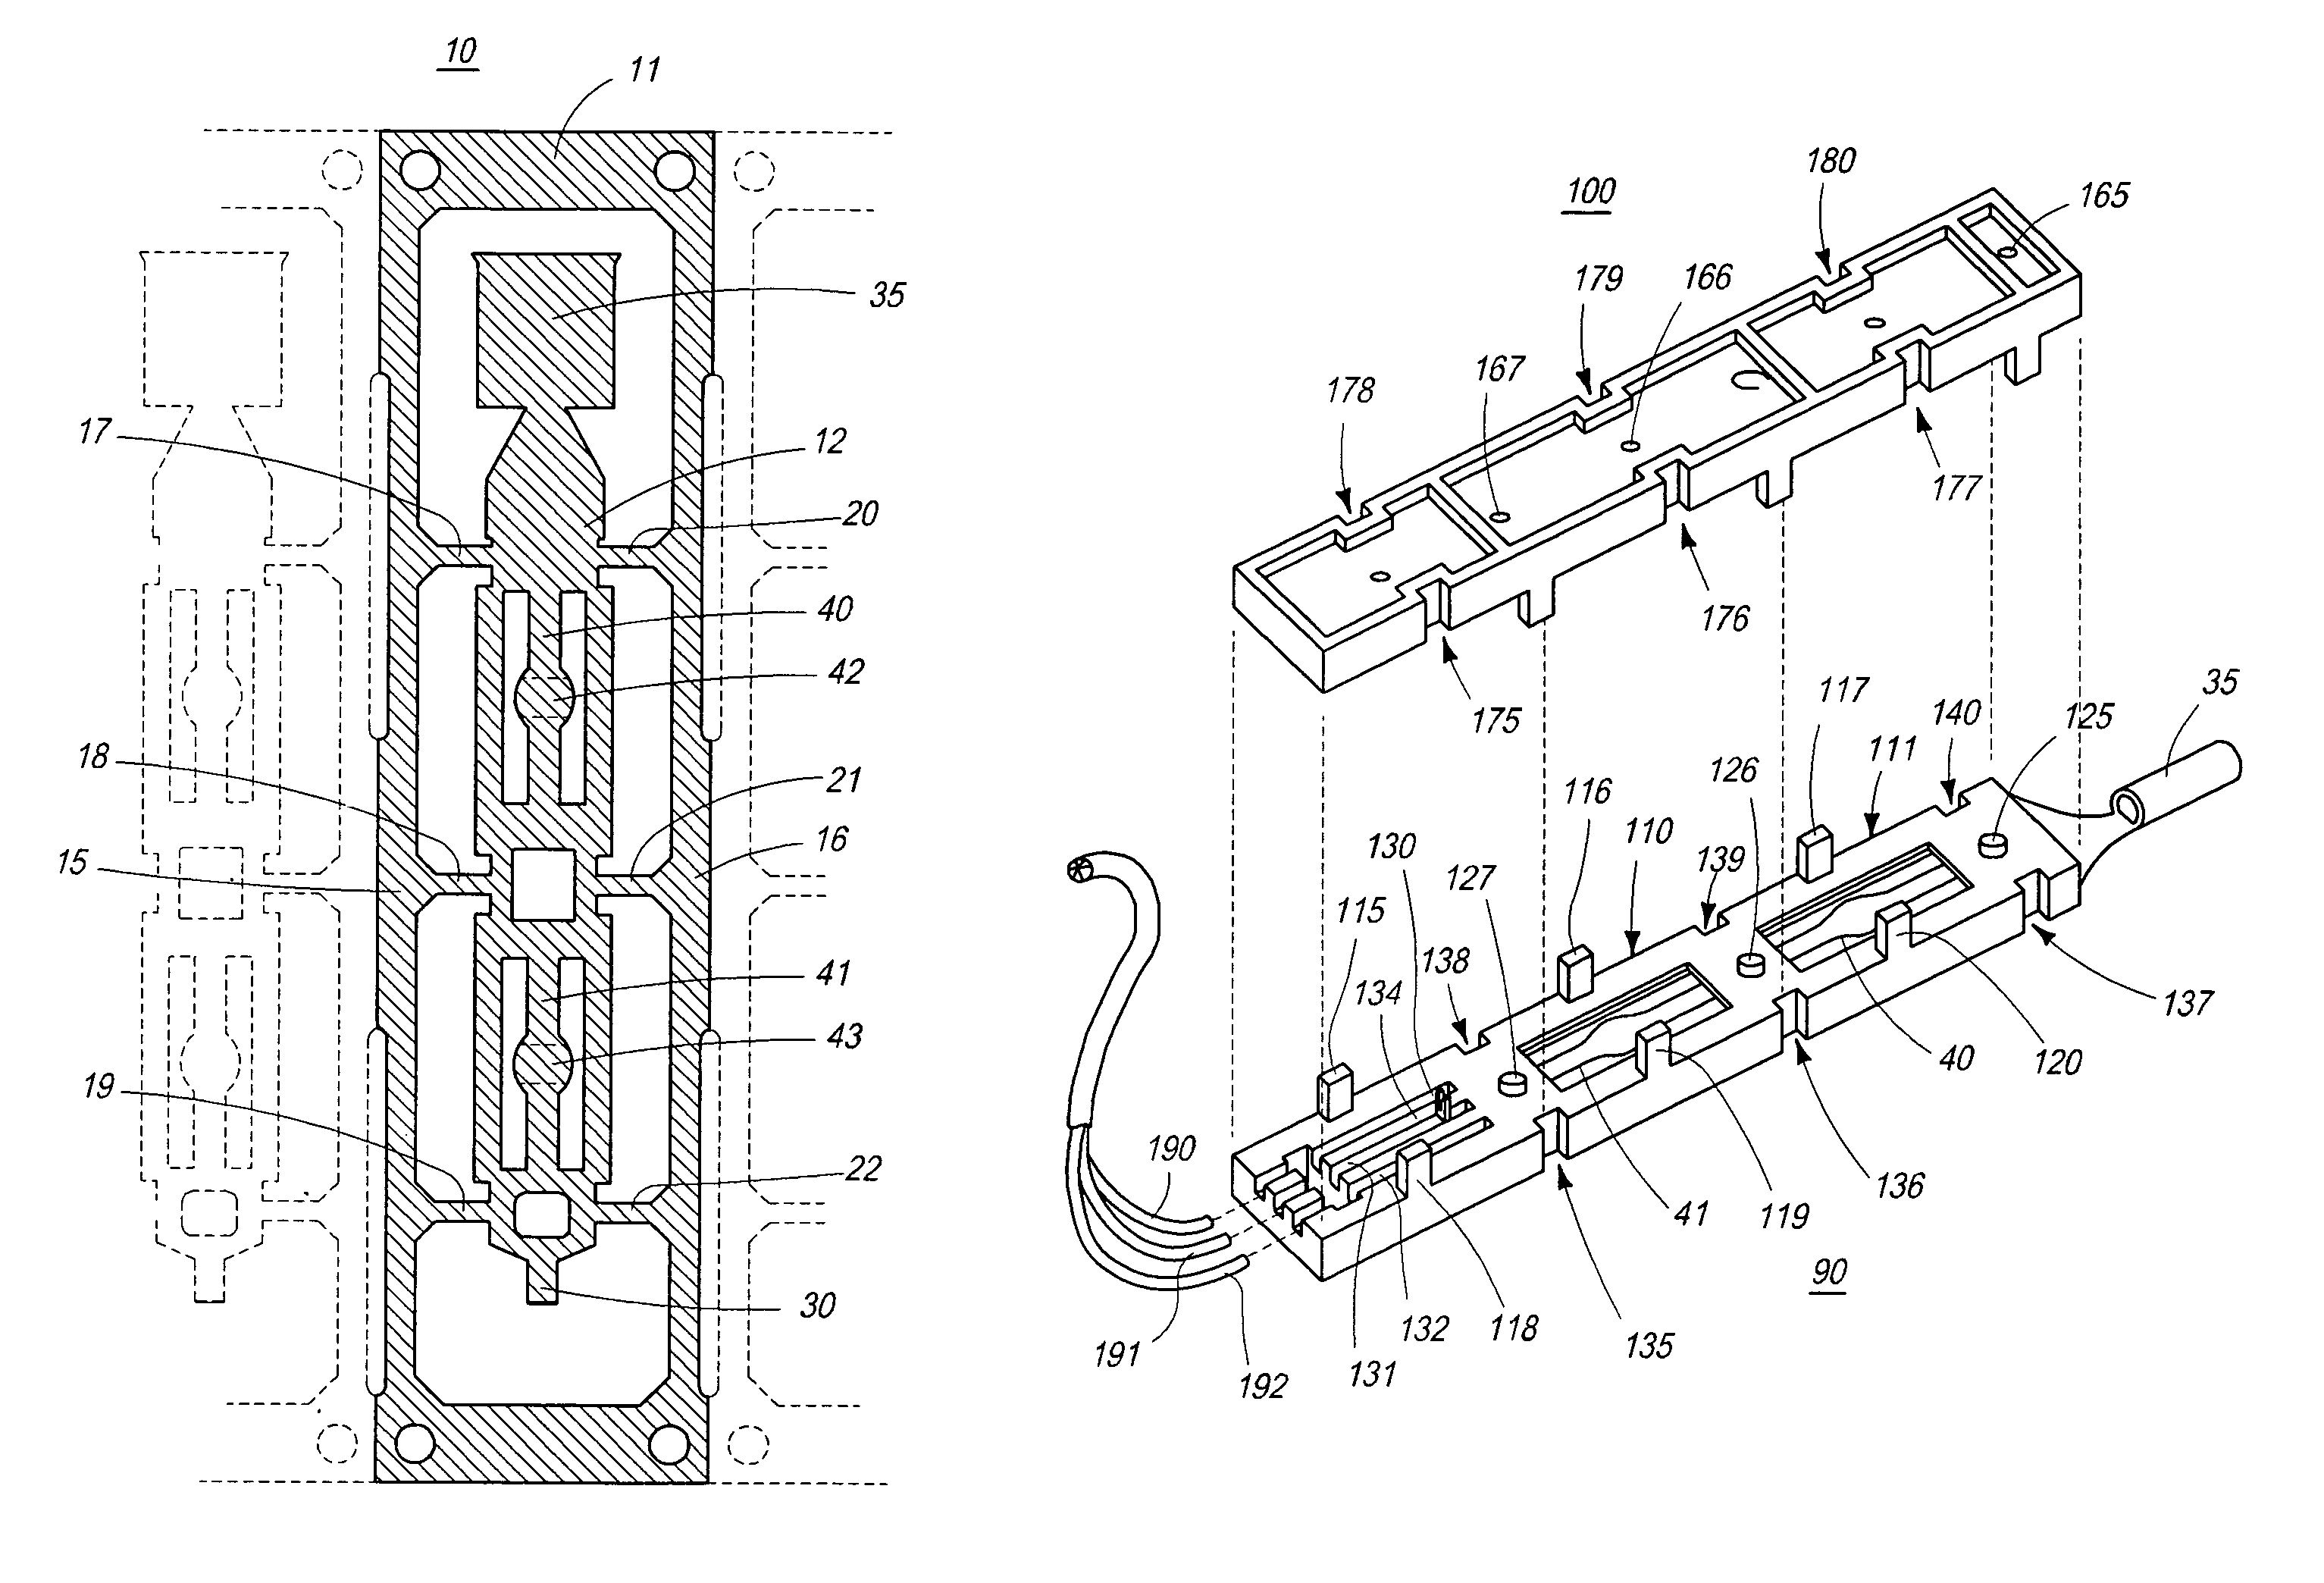 Electrosurgical pencil switch, circuitry, and method of assembly